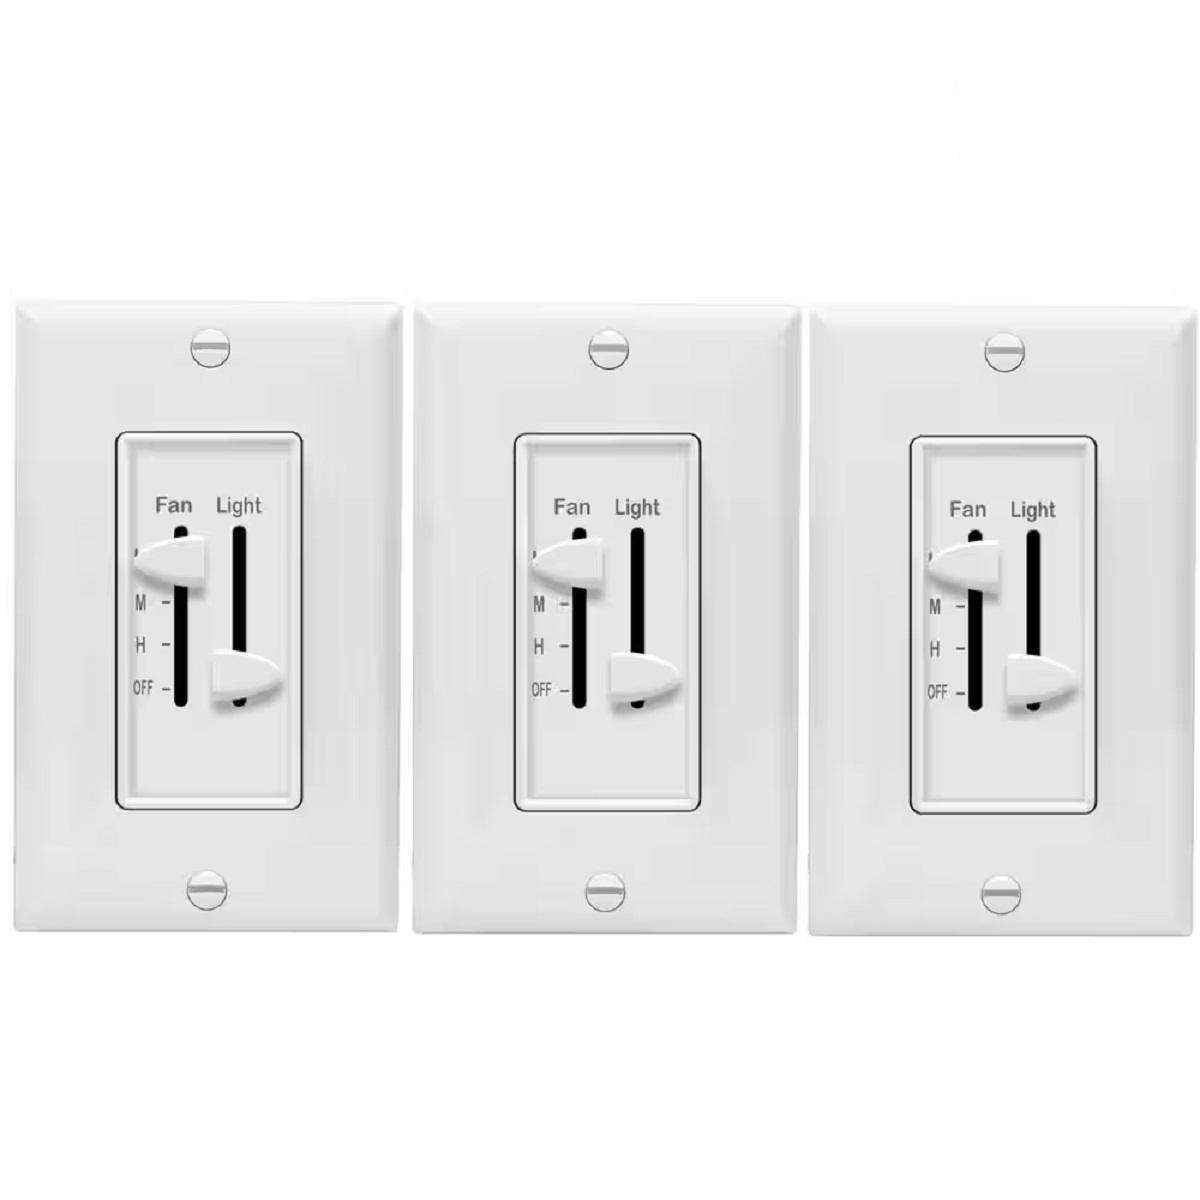 12 Incredible Fan And Light Dimmer Switch For 2023 1697295845 